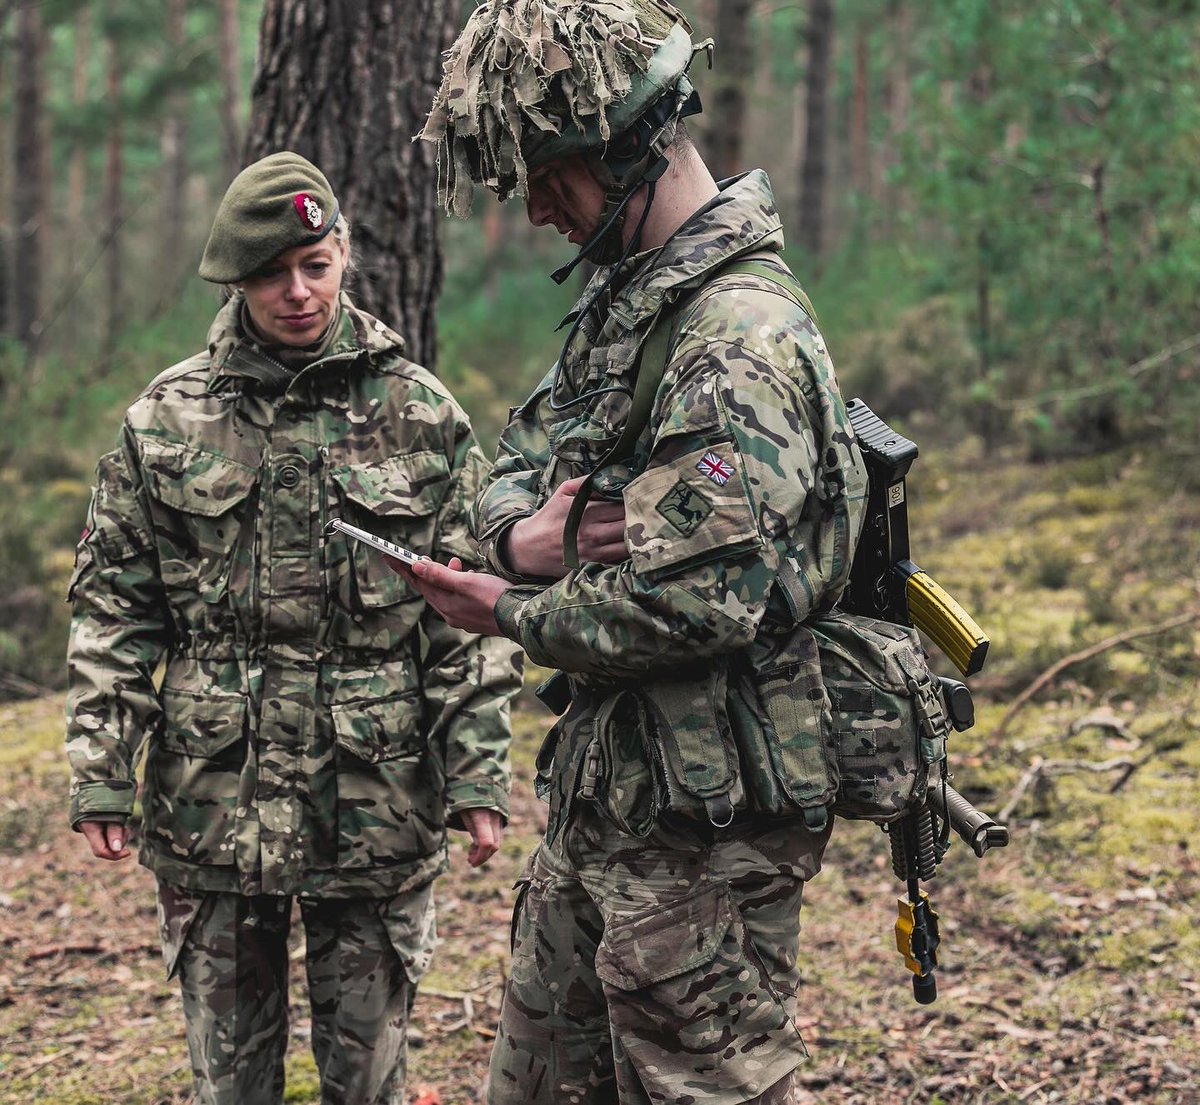 Do you want to conduct training that will benefit your civilian and military careers? HAC soldiers selected as potential future leaders, continue their development training. Skills learnt increase confidence, experience gained in crisis and personnel management under pressure.